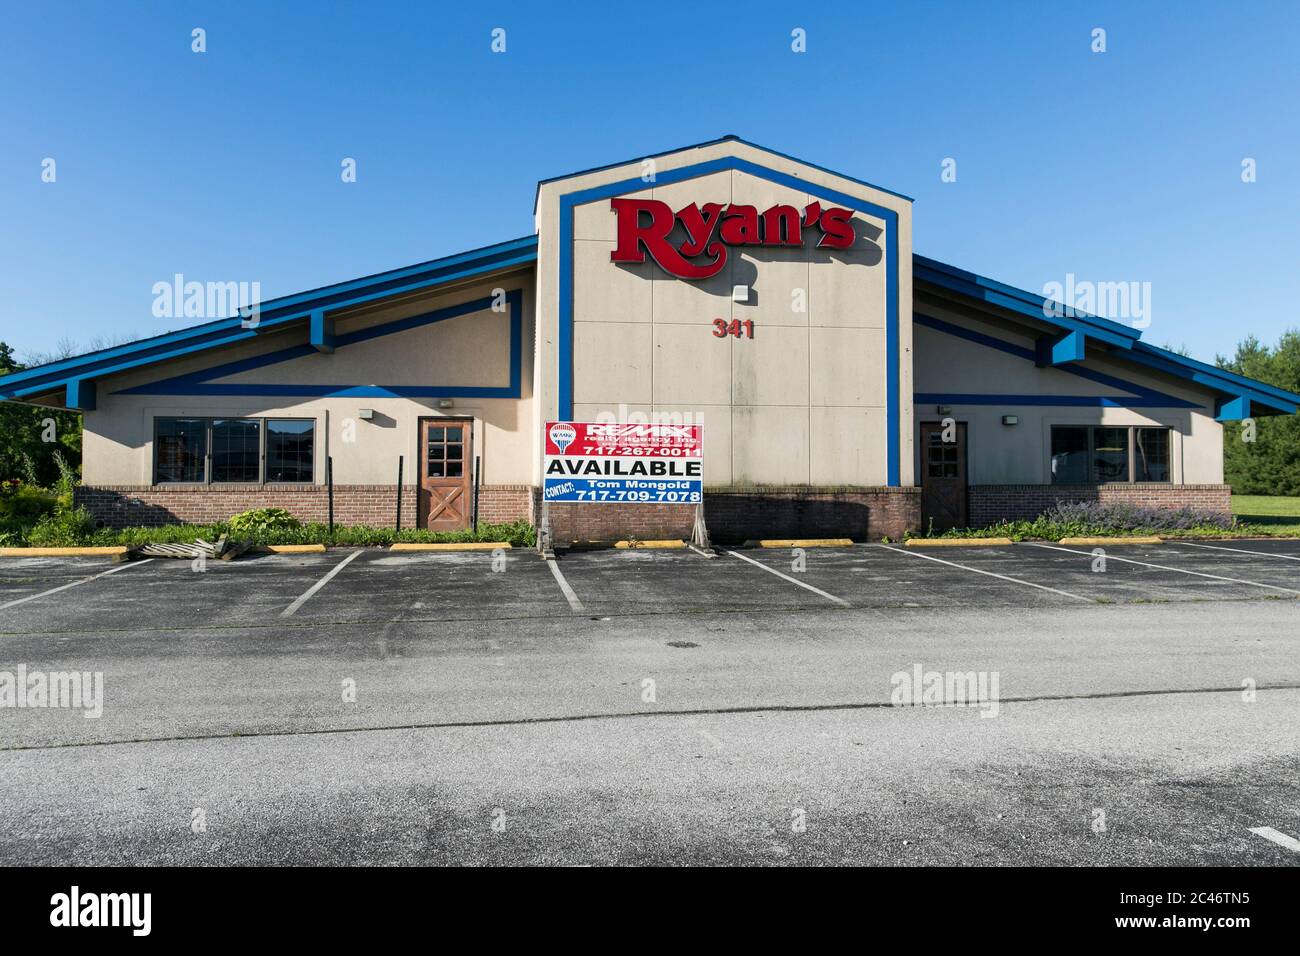 A logo sign outside of a closed and abandoned Ryan's Buffet restaurant location in Hanover, Pennsylvania on June 12, 2020. Stock Photo